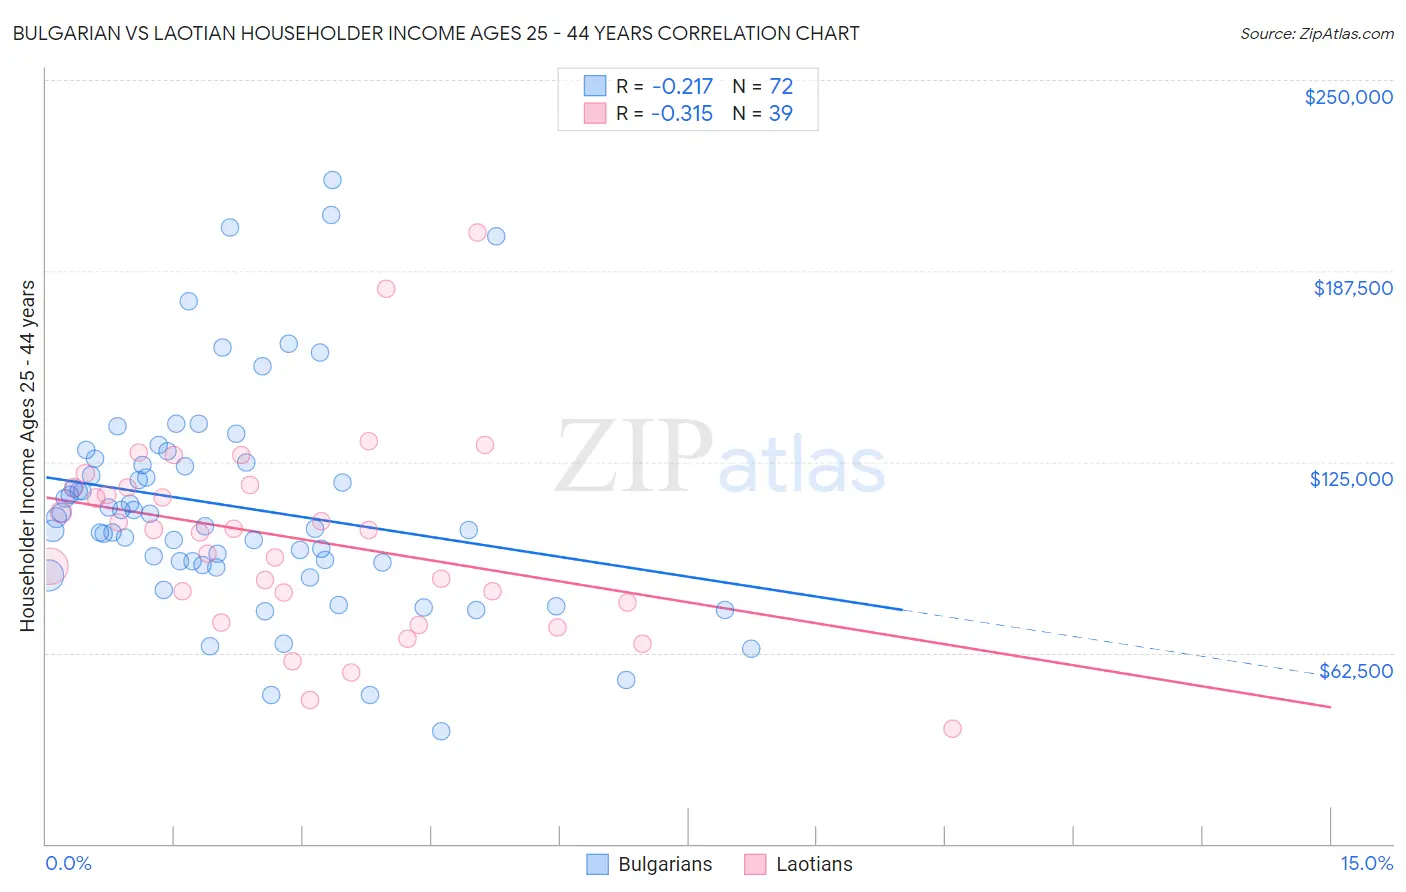 Bulgarian vs Laotian Householder Income Ages 25 - 44 years